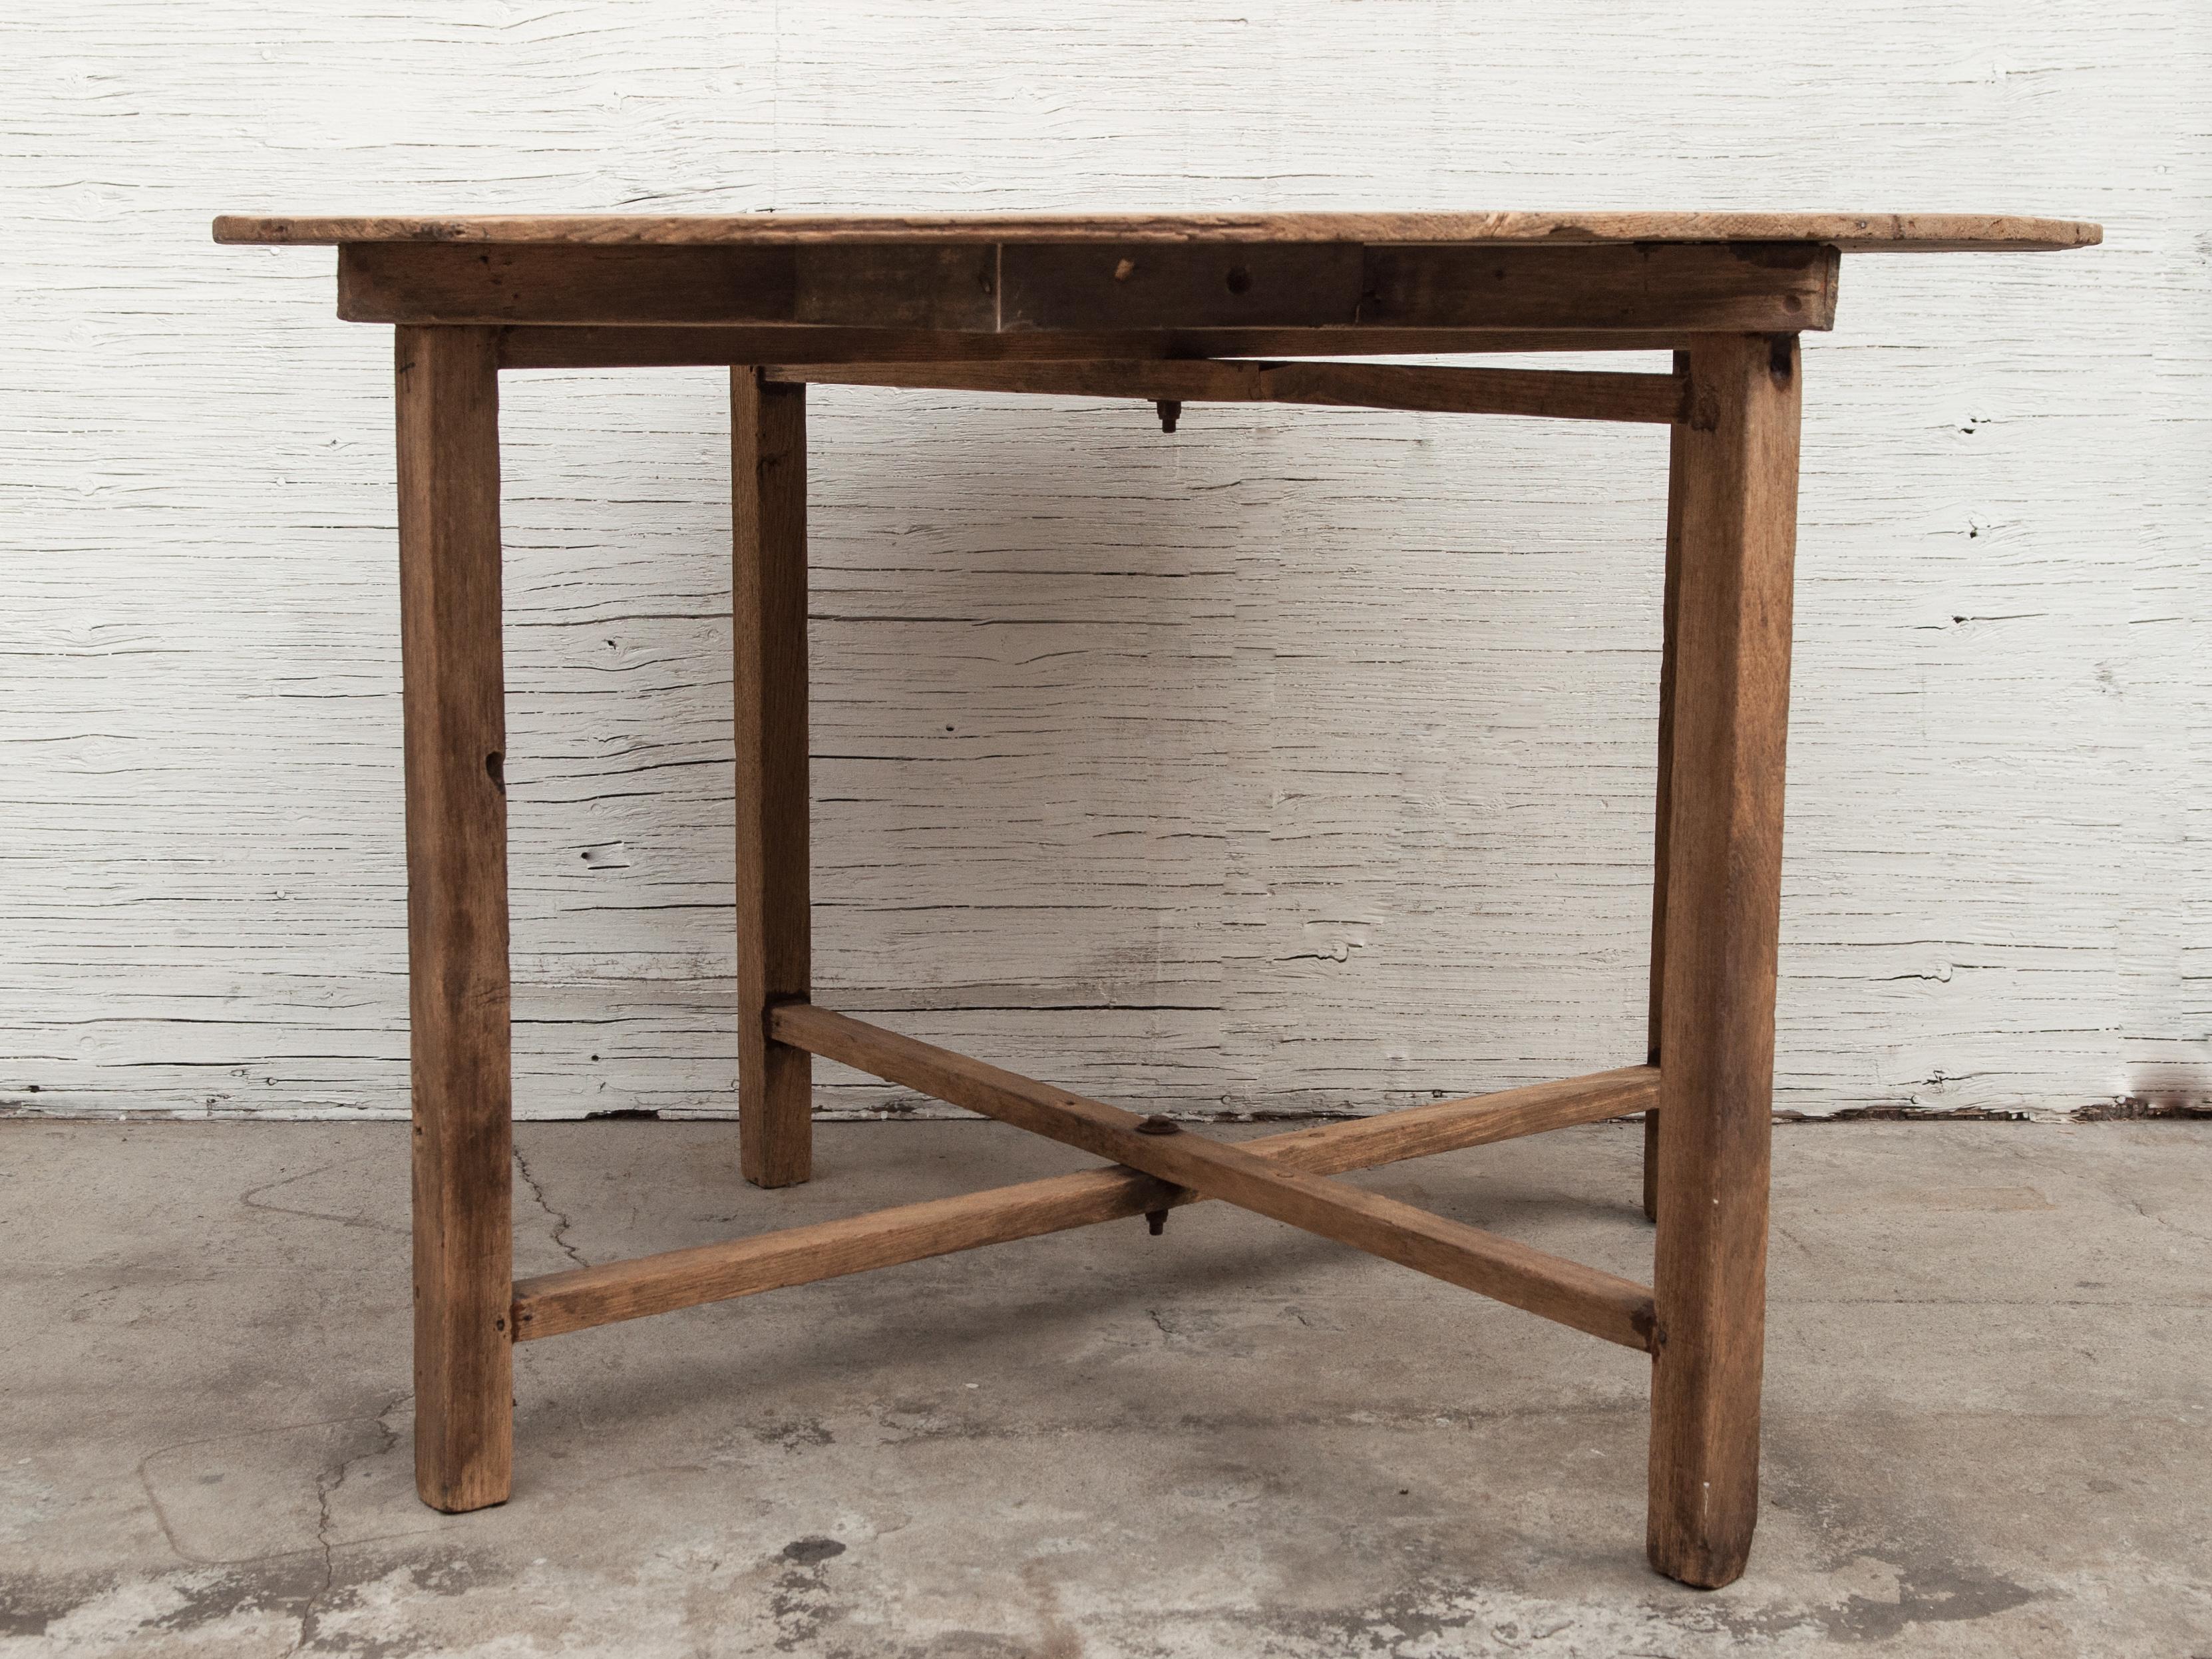 Hand-Crafted Vintage Teak Round Table / Farm Table from Burma, Mid-20th Century